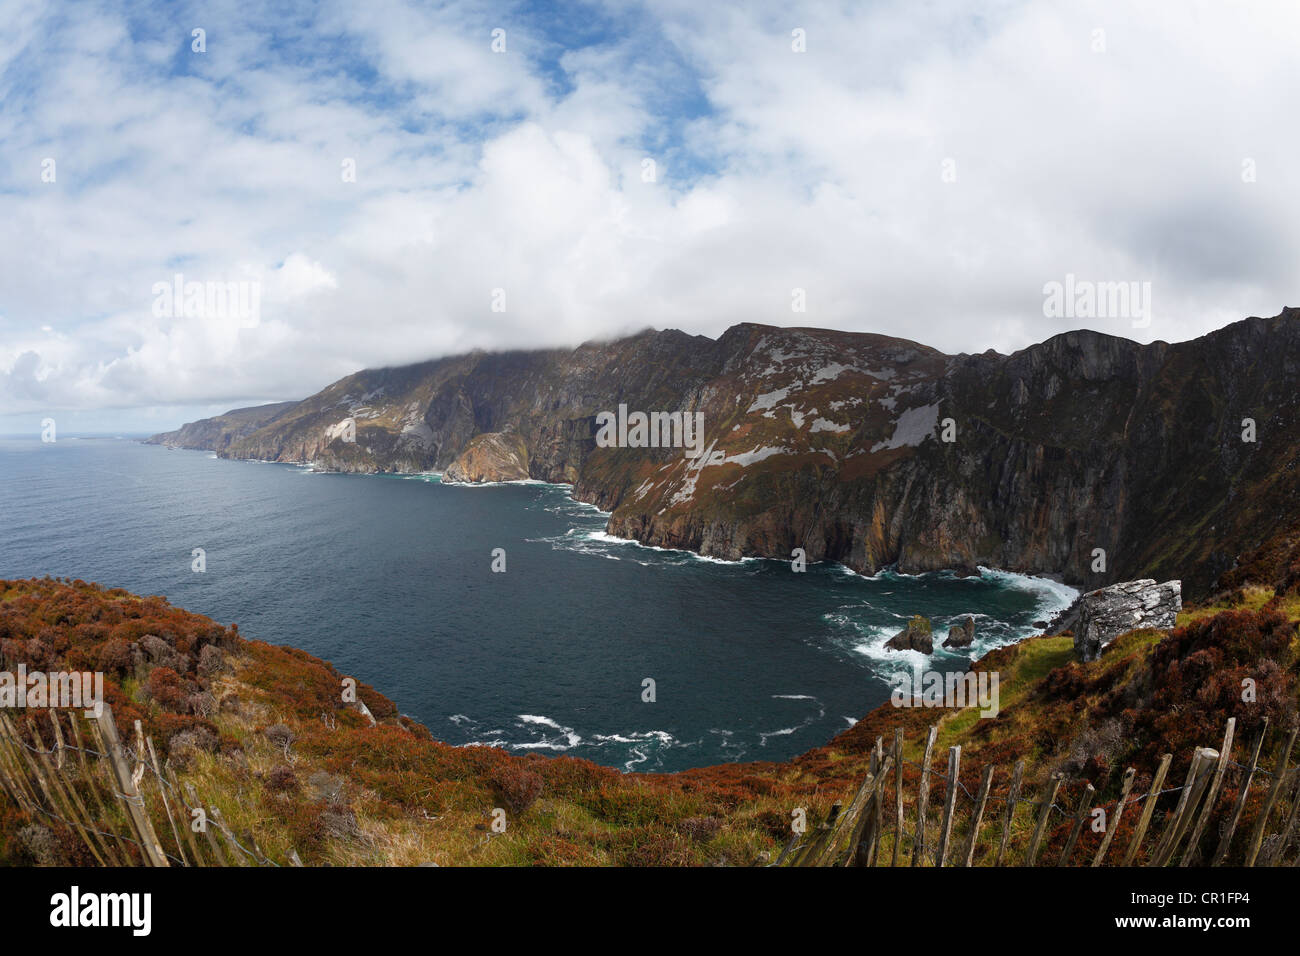 Cliffs of Slieve League, County Donegal, Ireland, Europe Stock Photo